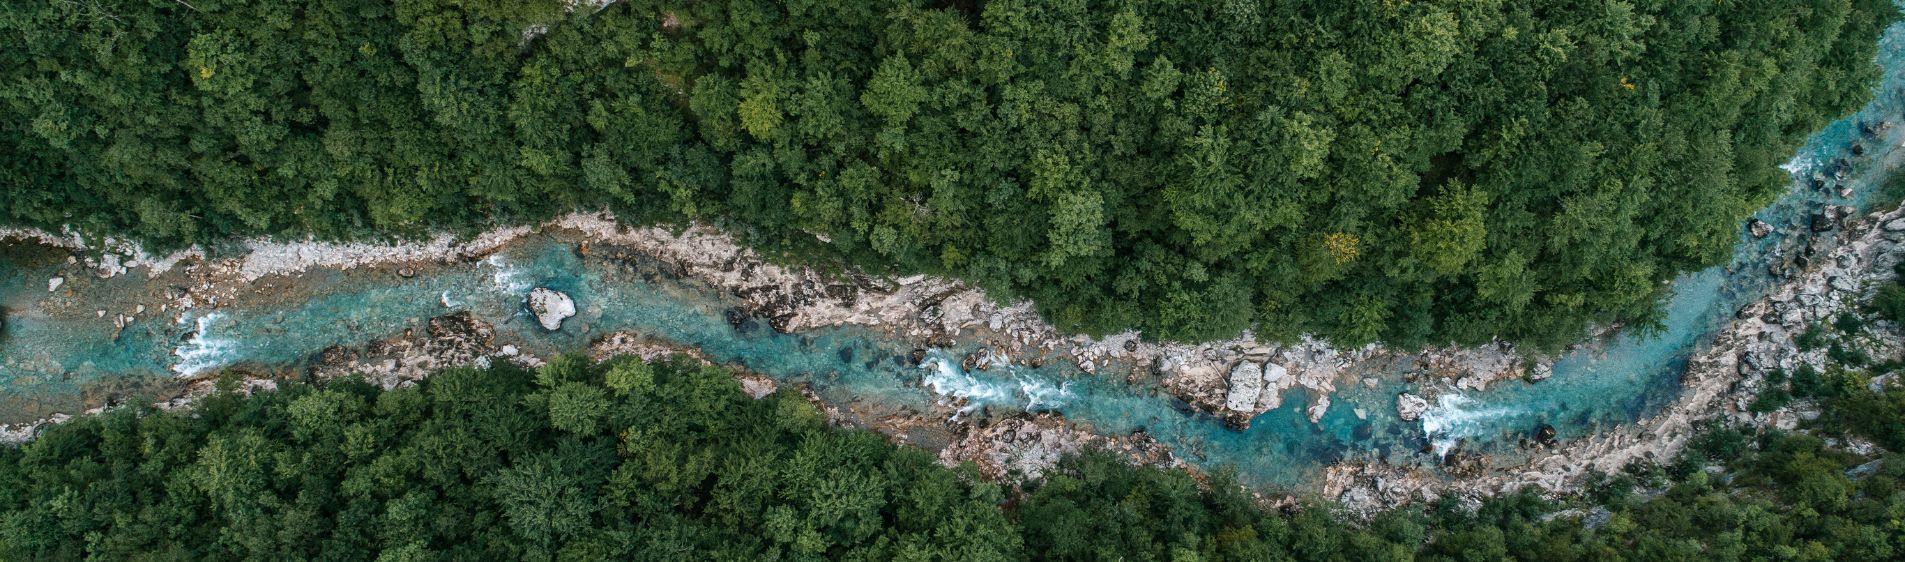 River flowing in the forest. Aerial view